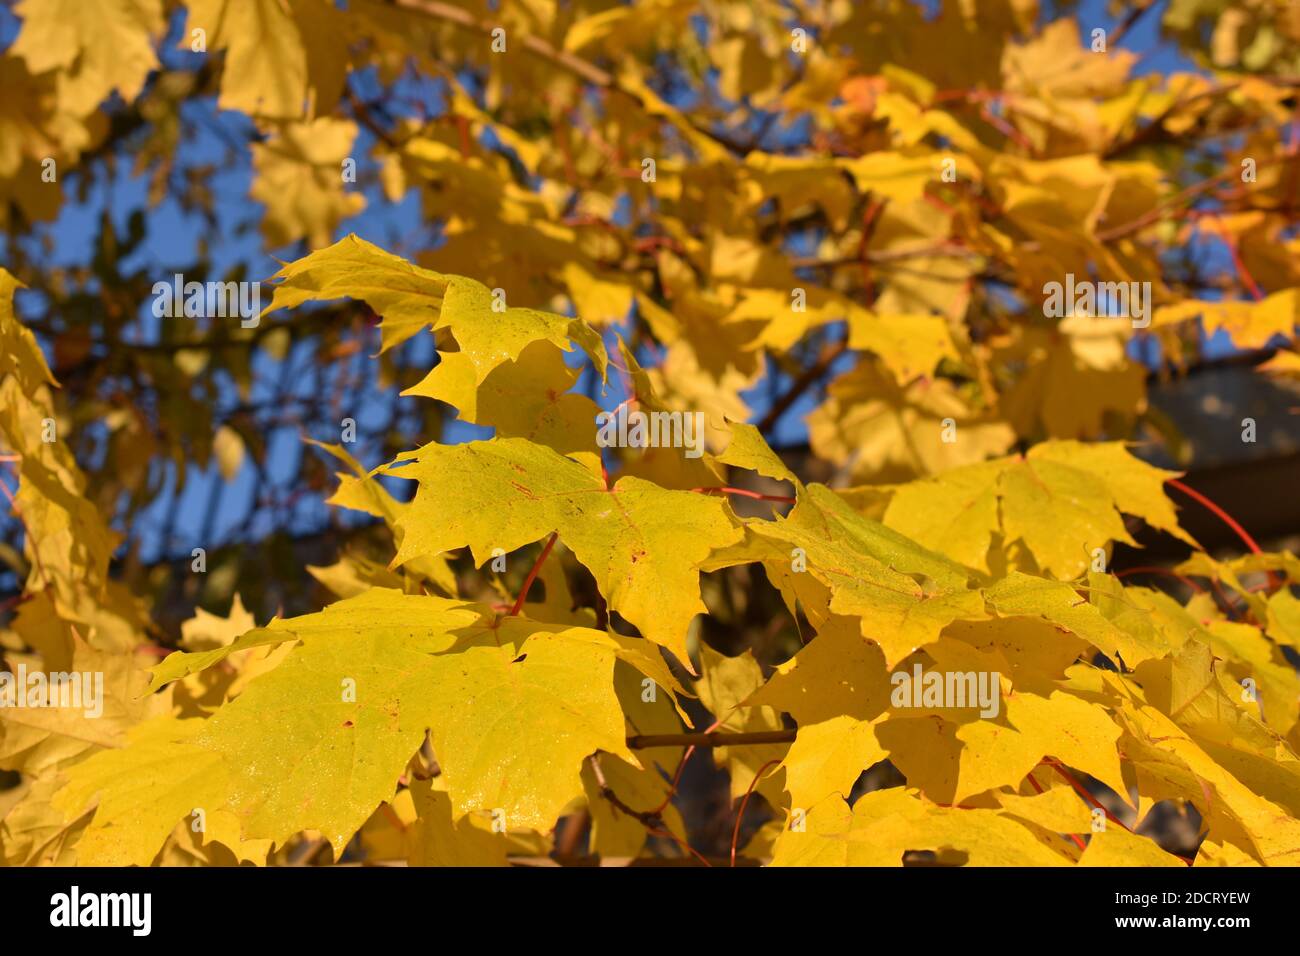 Intense yellow leaves on a maple tree in front of blue sky in late autumn Stock Photo